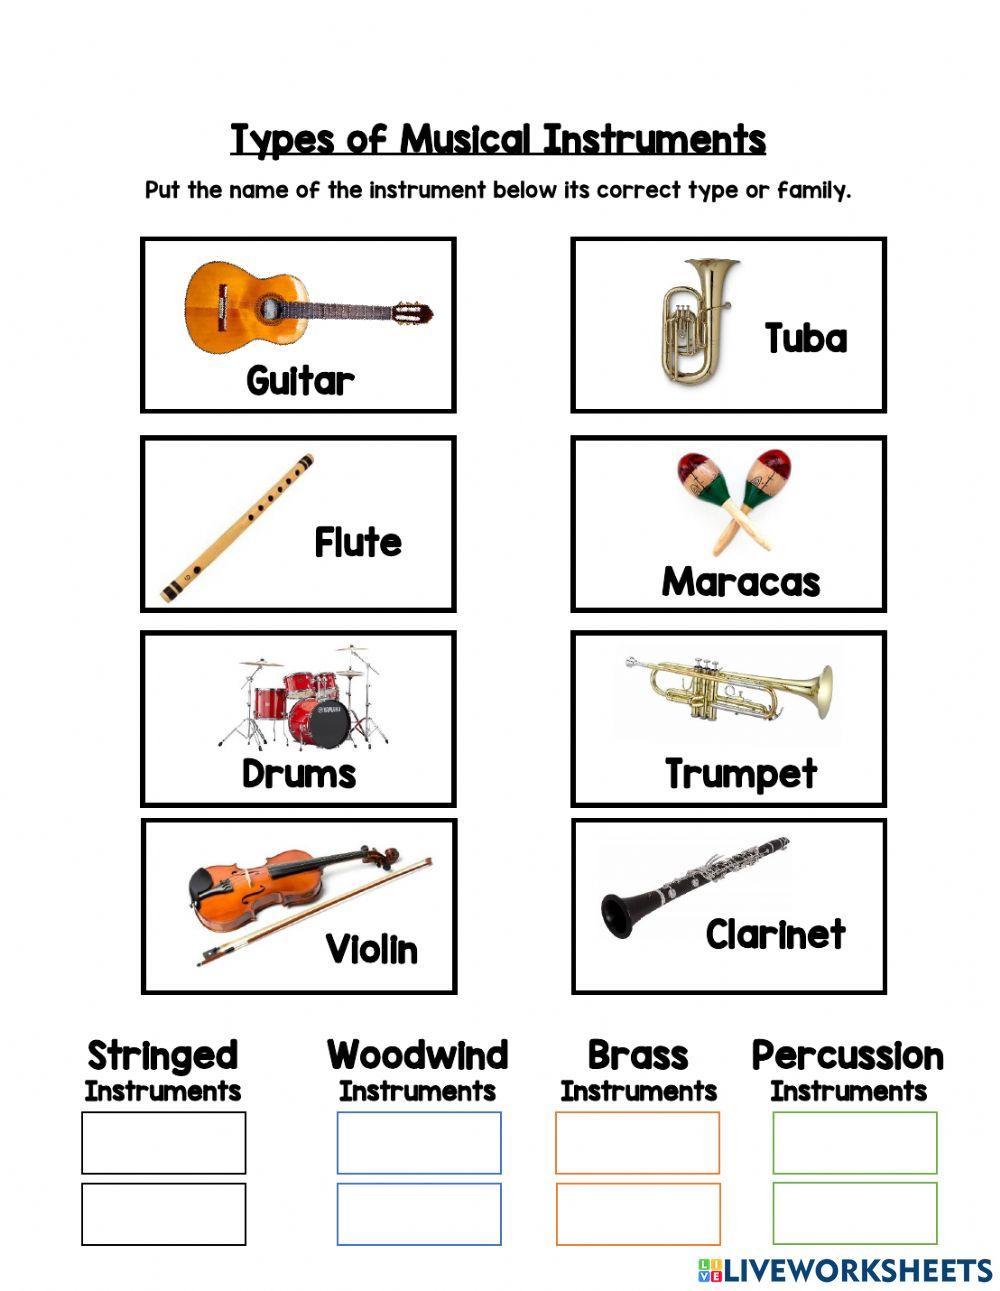 Types of Musical Instruments